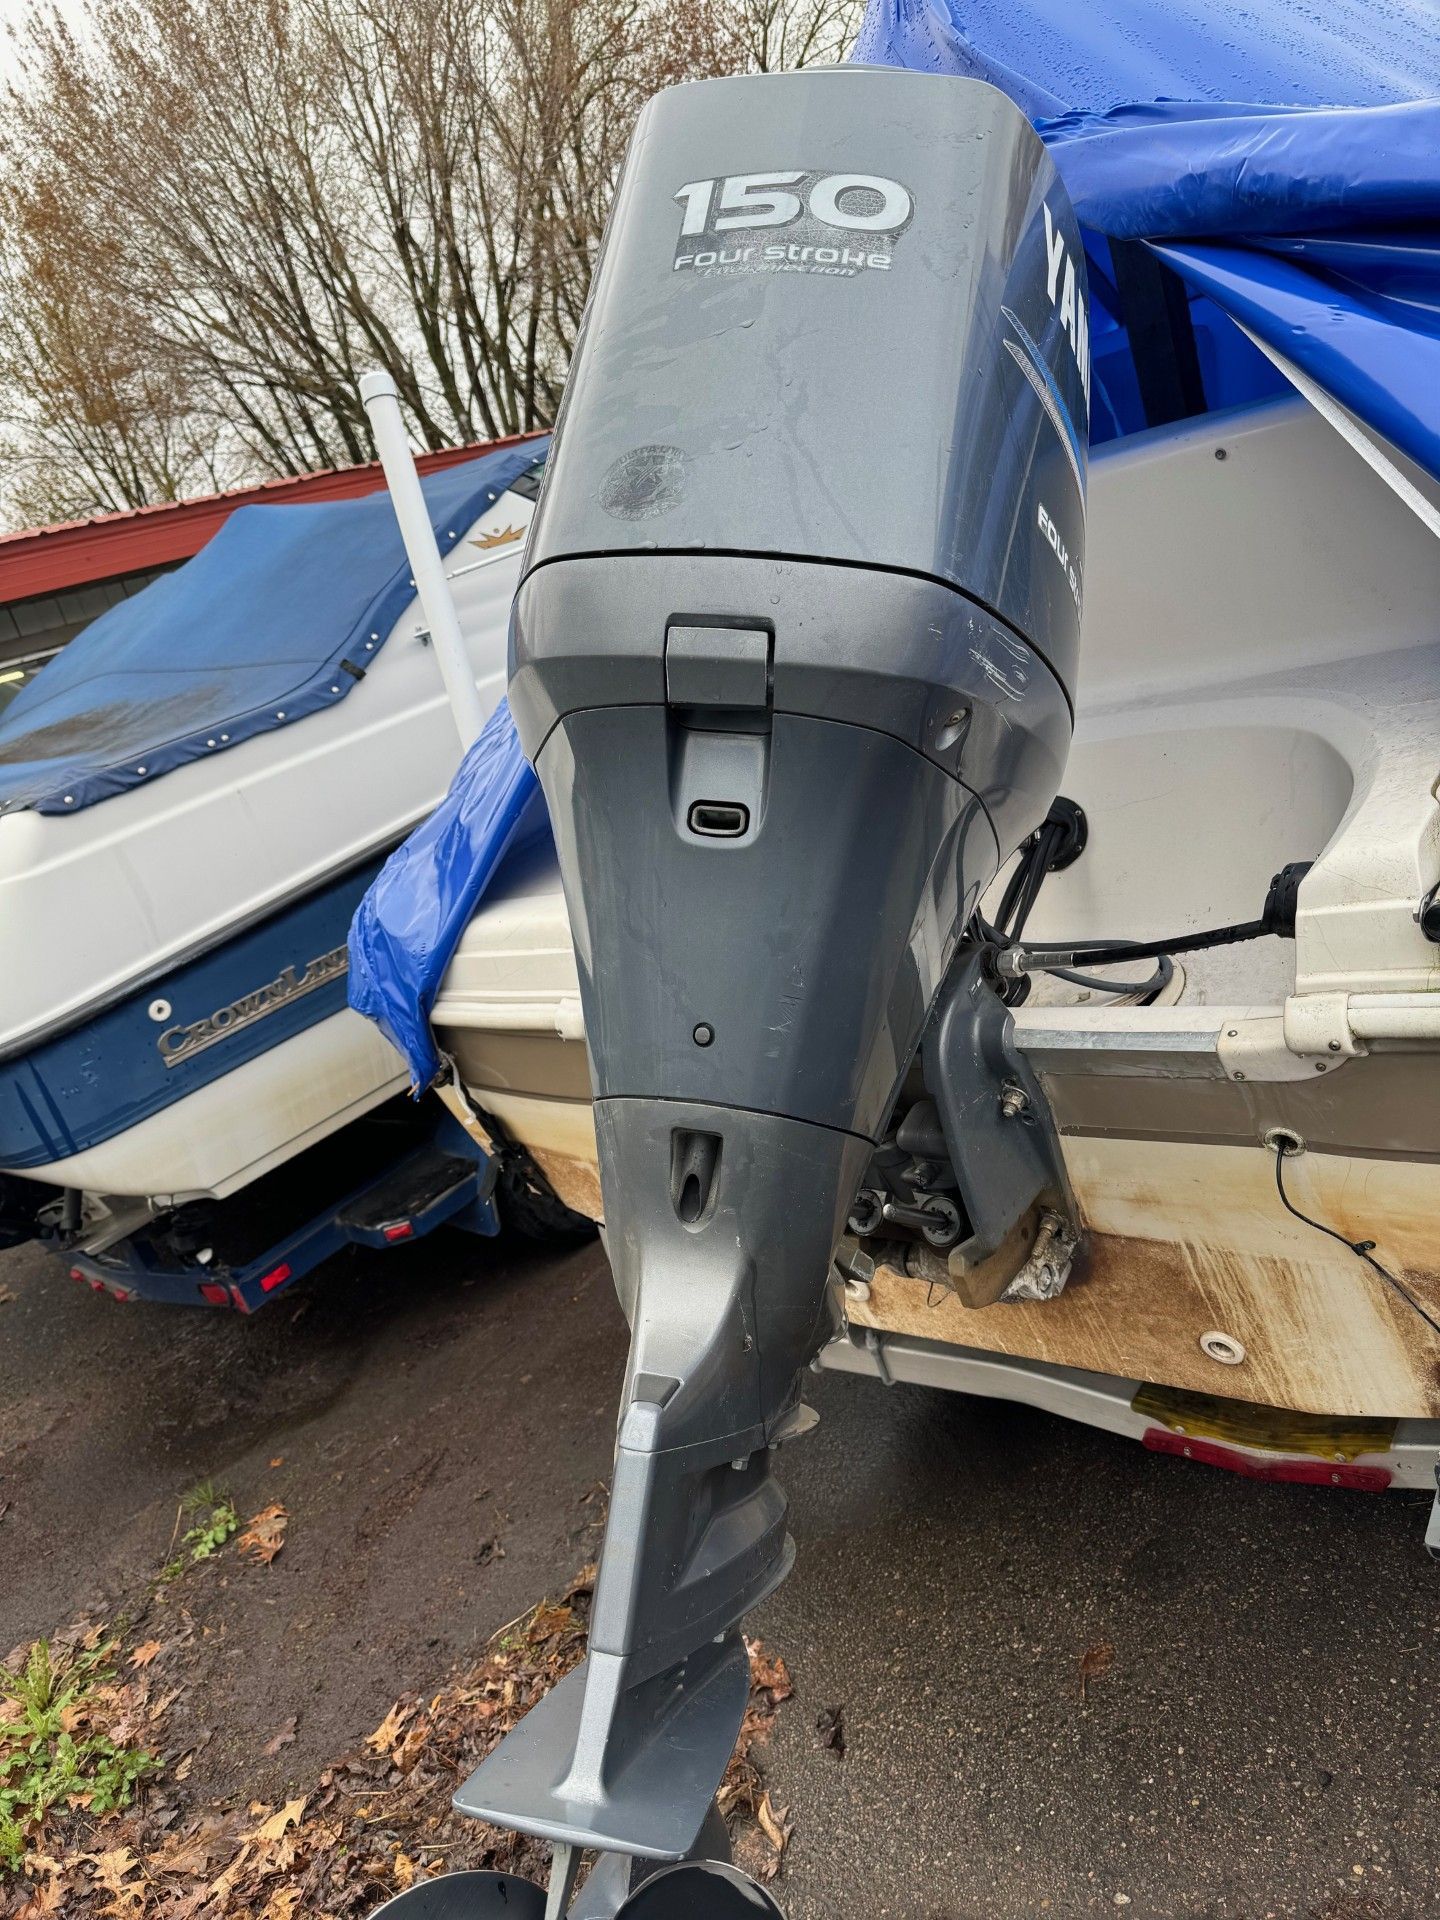 A yamaha 150 outboard motor is sitting on the side of a boat.